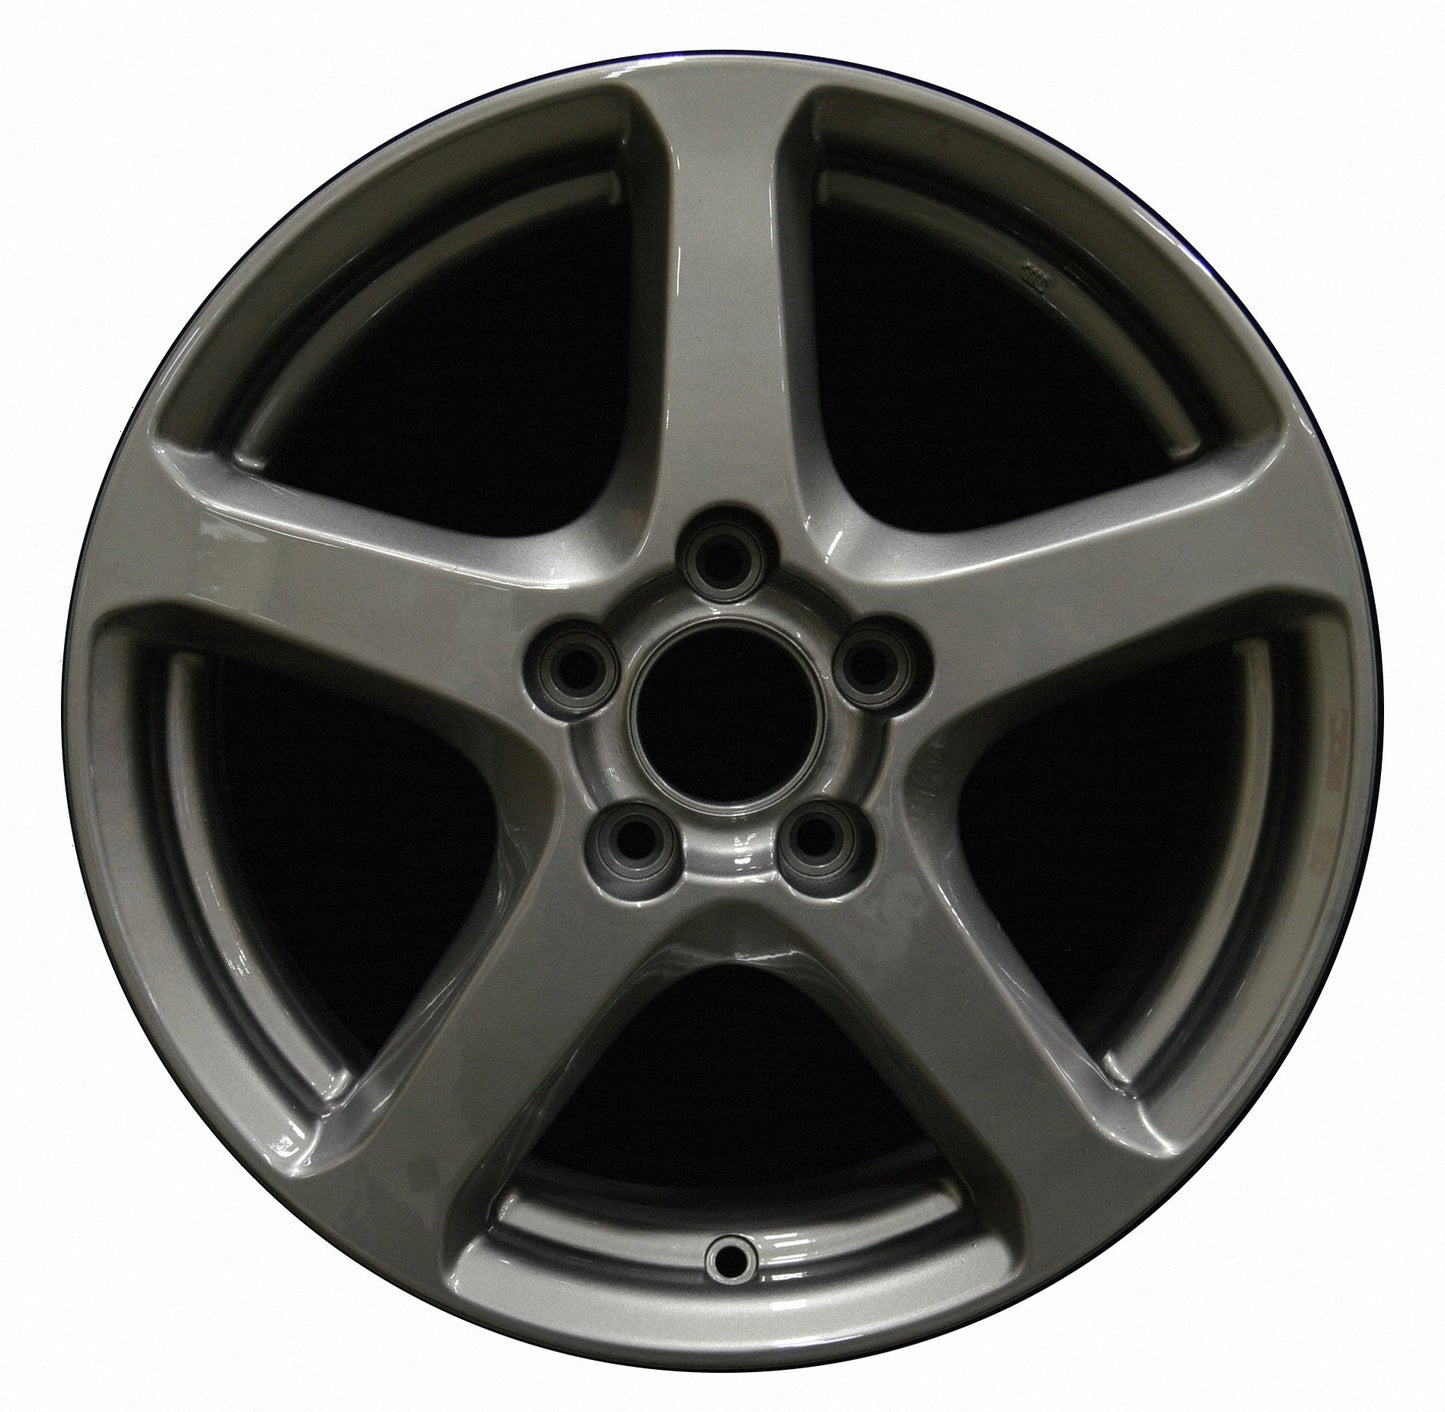 Acura TSX  2004, 2005, 2006, 2007, 2008 Factory OEM Car Wheel Size 17x7 Alloy WAO.71738.LC25.FF